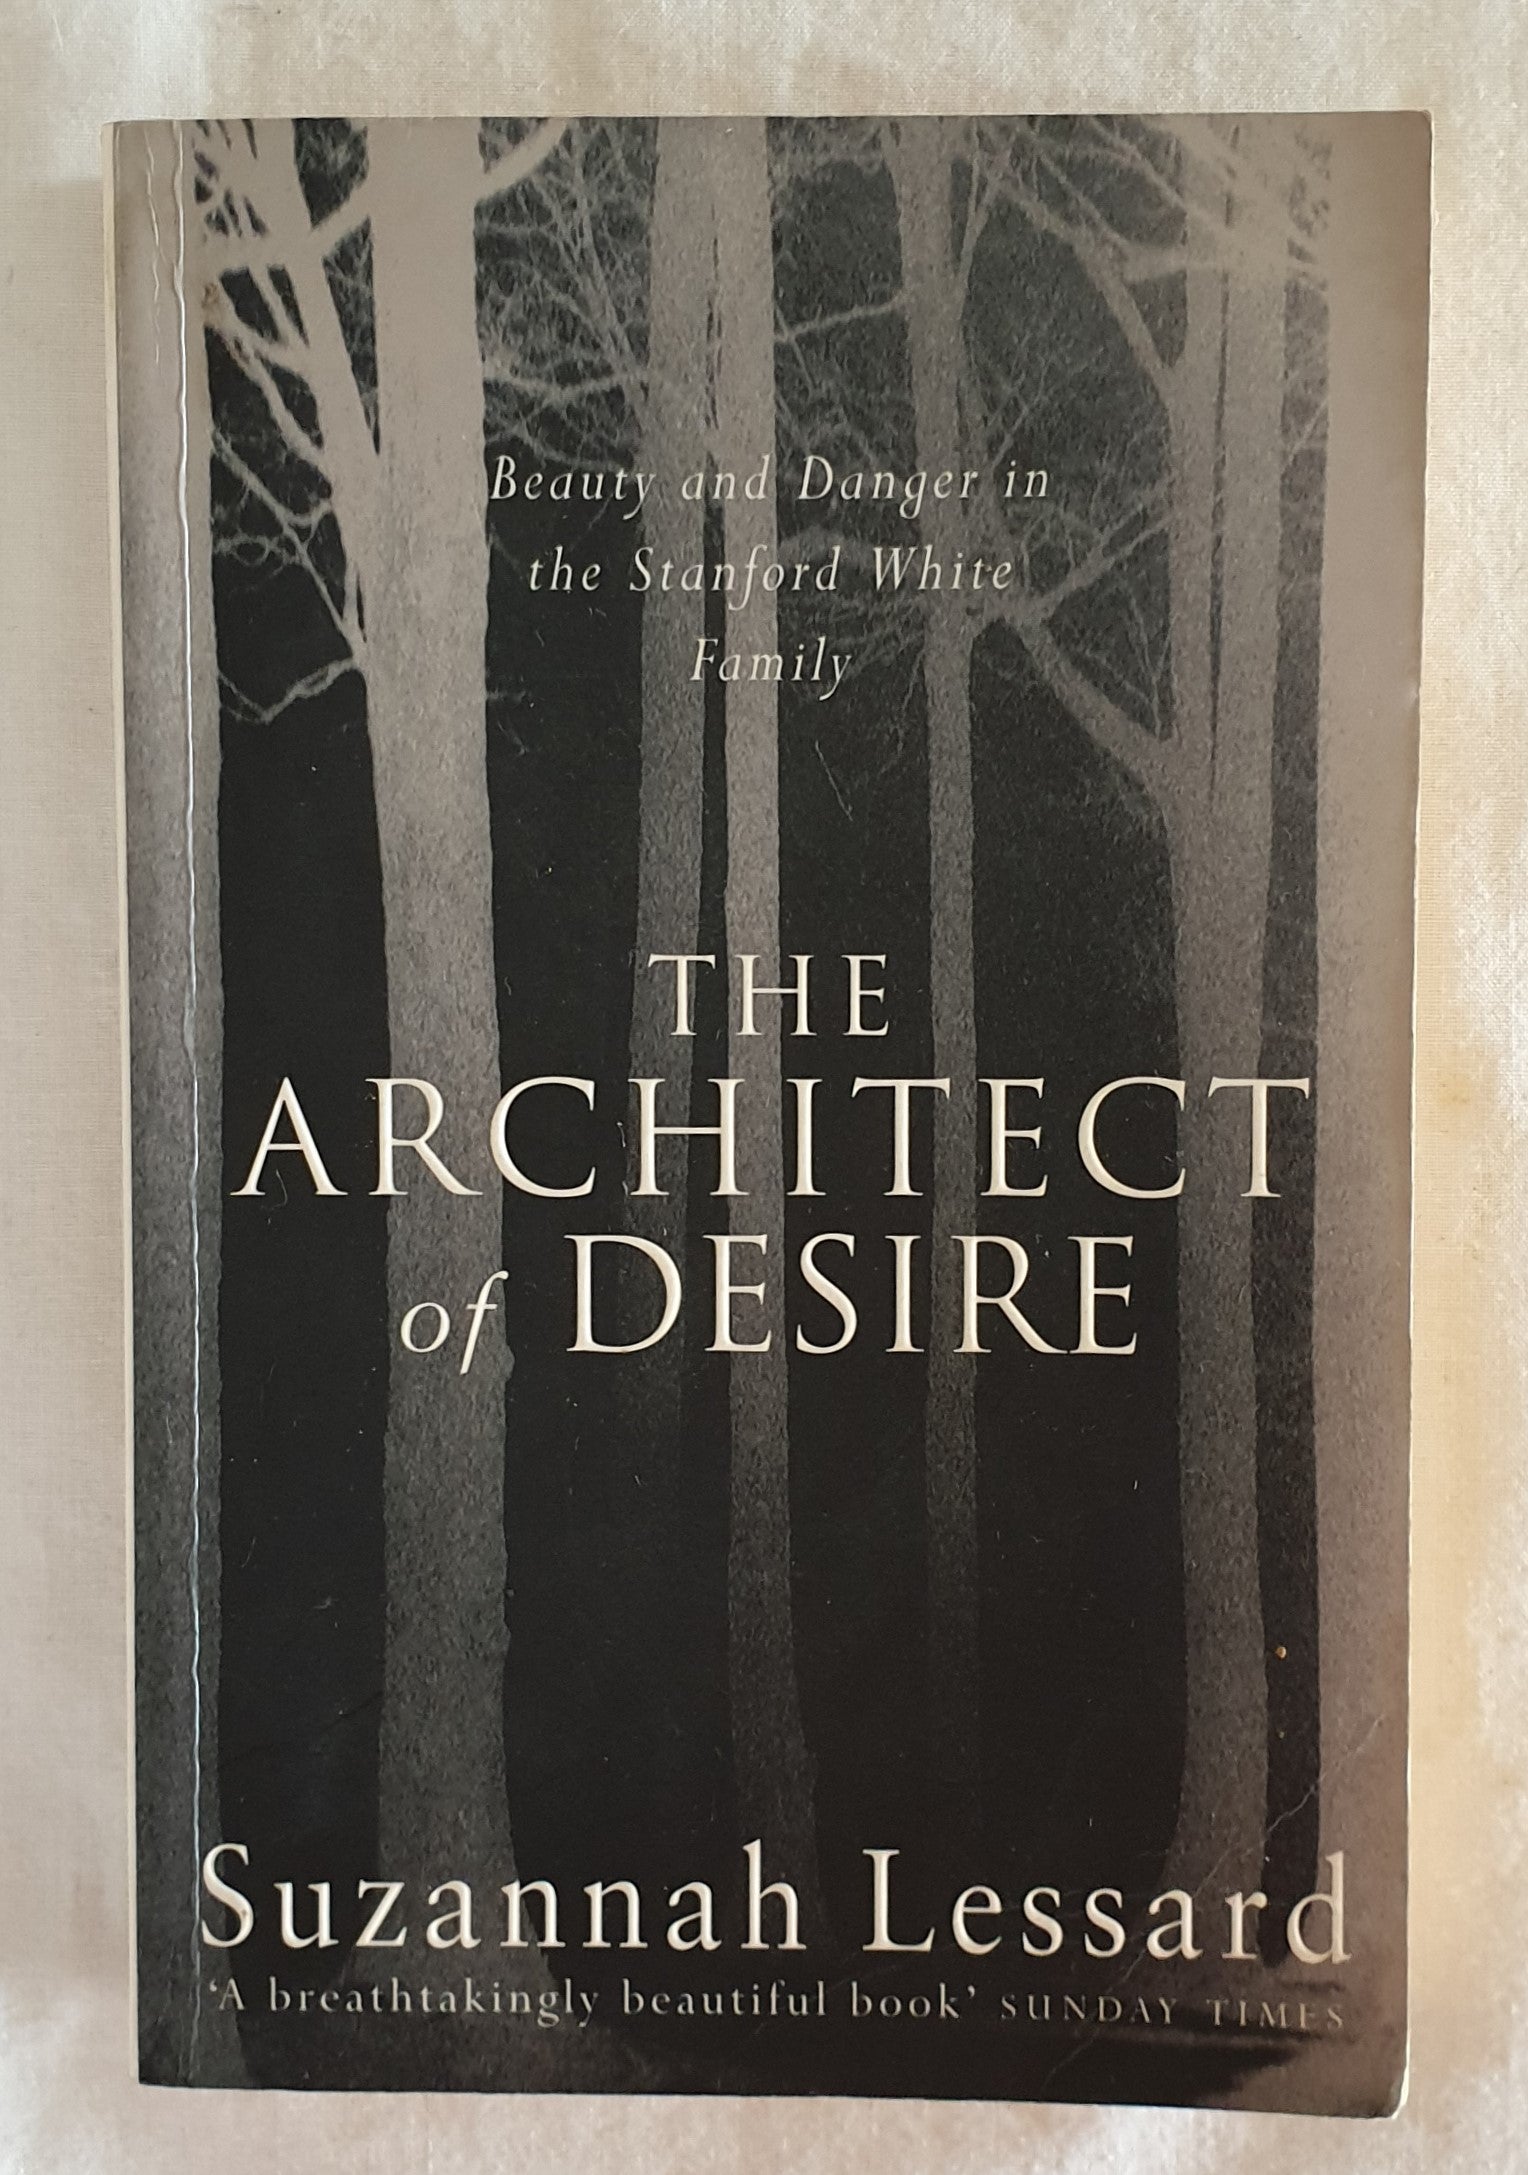 The Architect of Desire by Suzannah Lessard